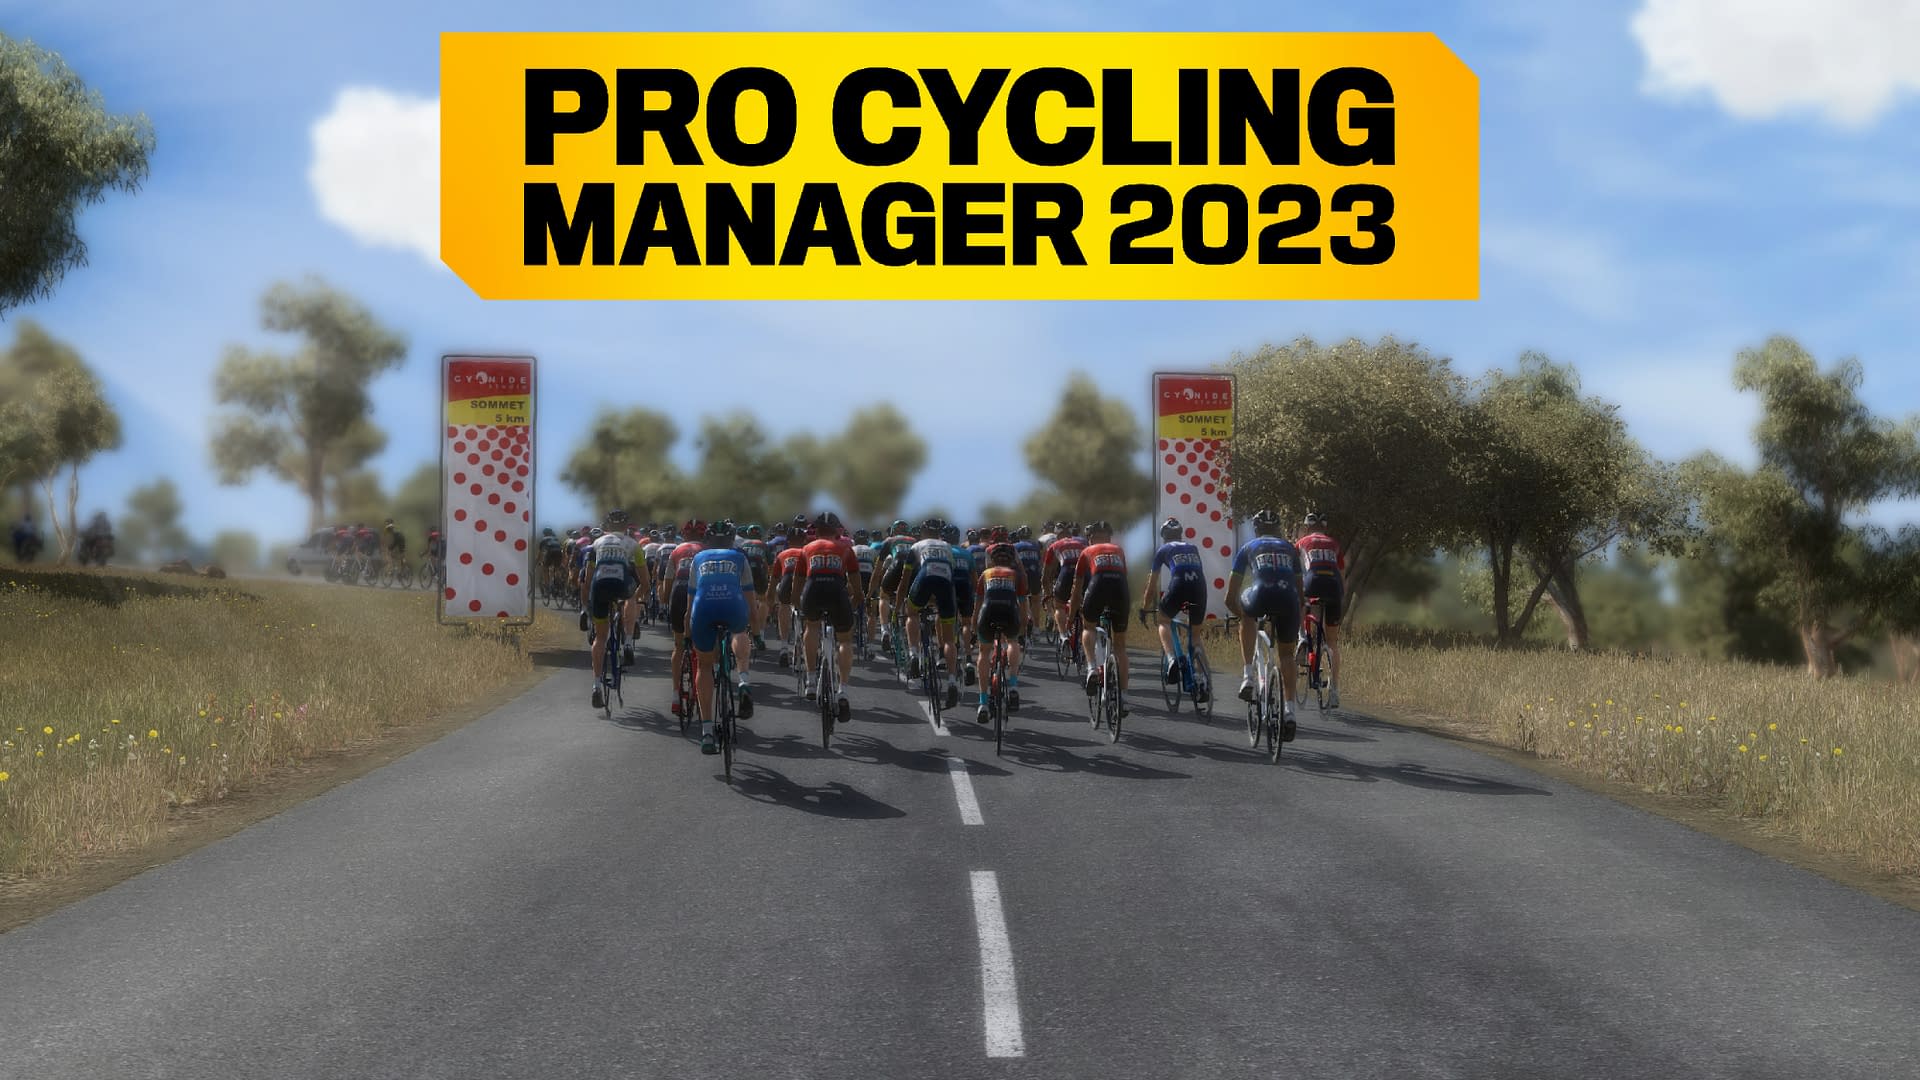 Pro Cycling Manager 2023 - Official Launch Trailer - IGN